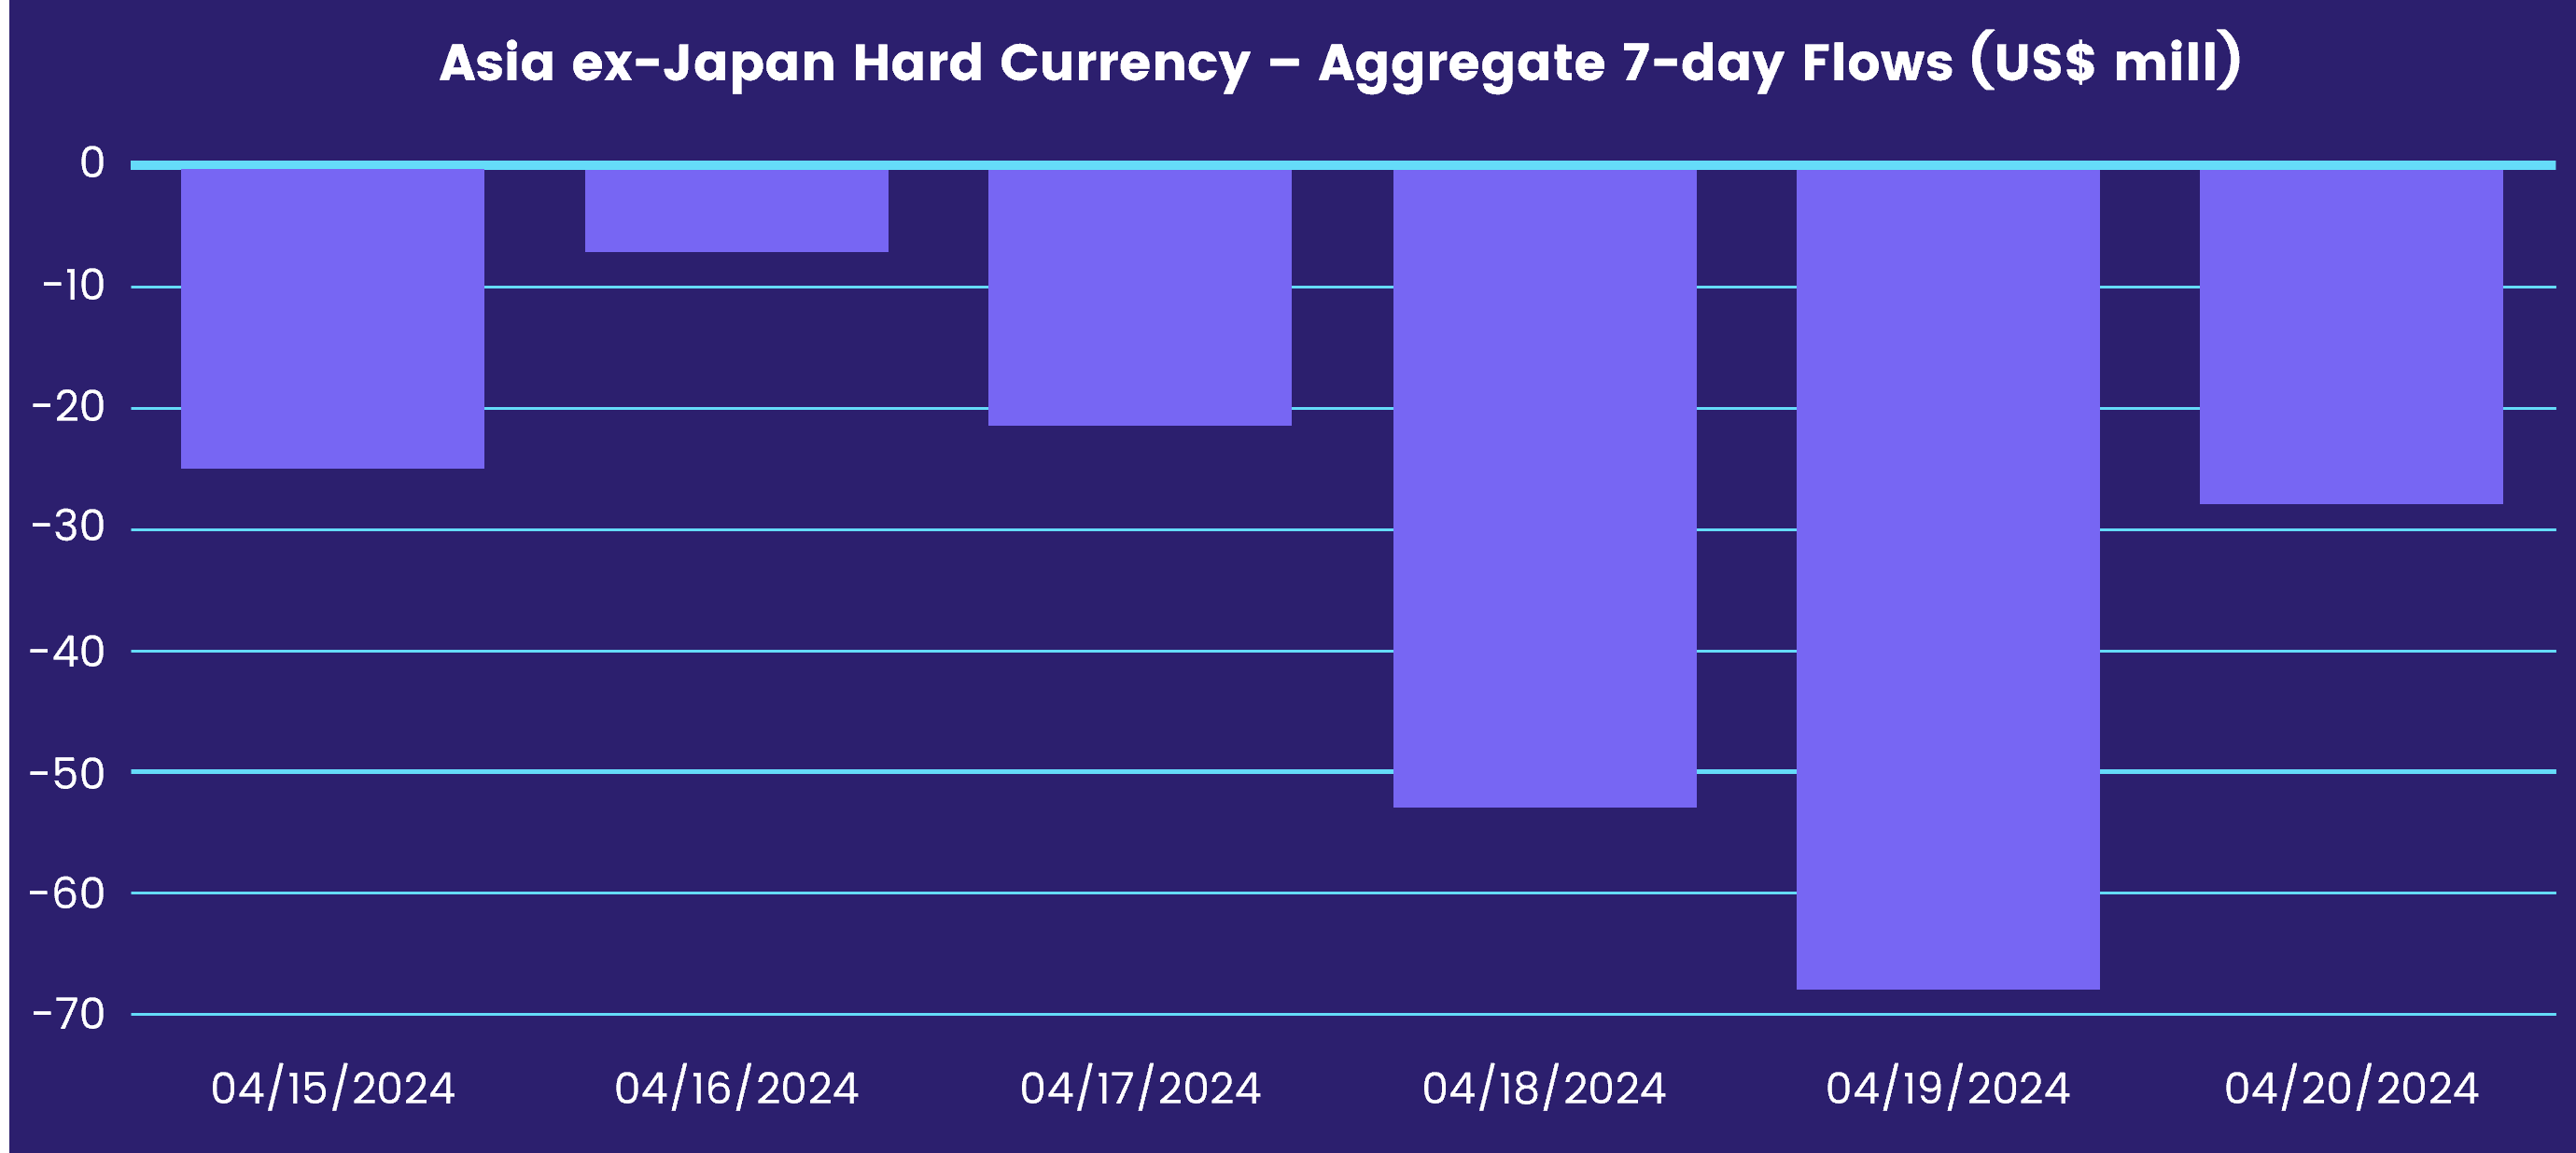 Pre-Market Fund Flow - Asia ex-Japan Hard Currency Aggregate Flows